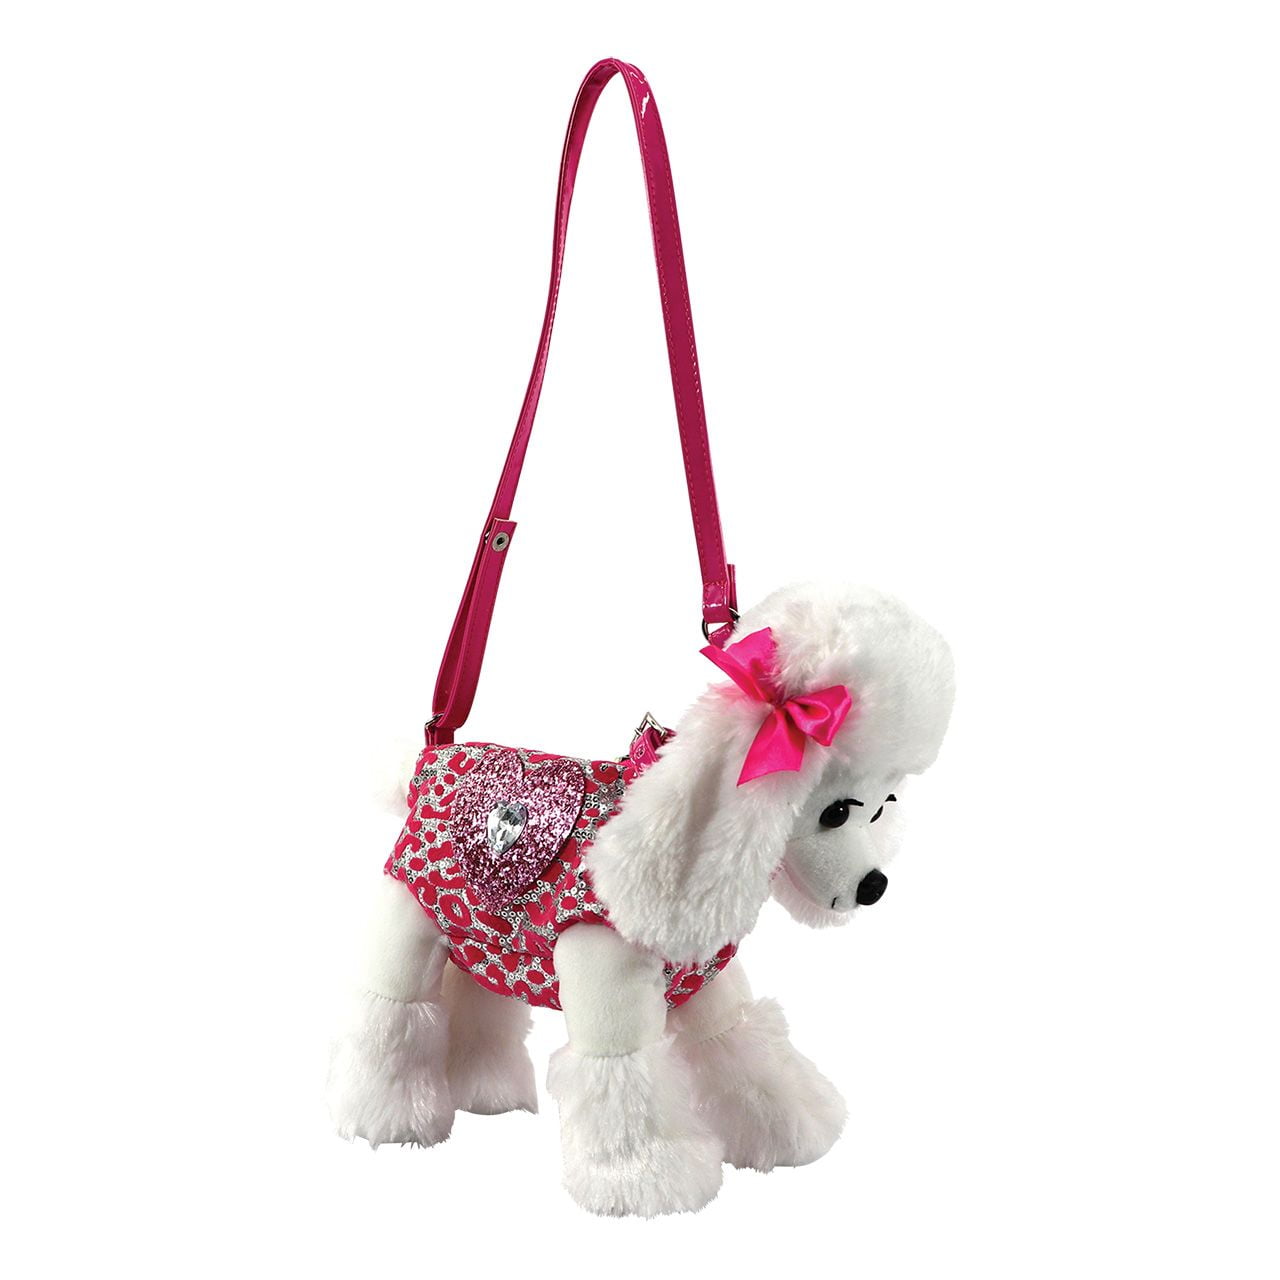 Gymboree Poodle Puppy Dog Purse Pink Handles MISSING RIGHT EAR Free  Shipping - Granith